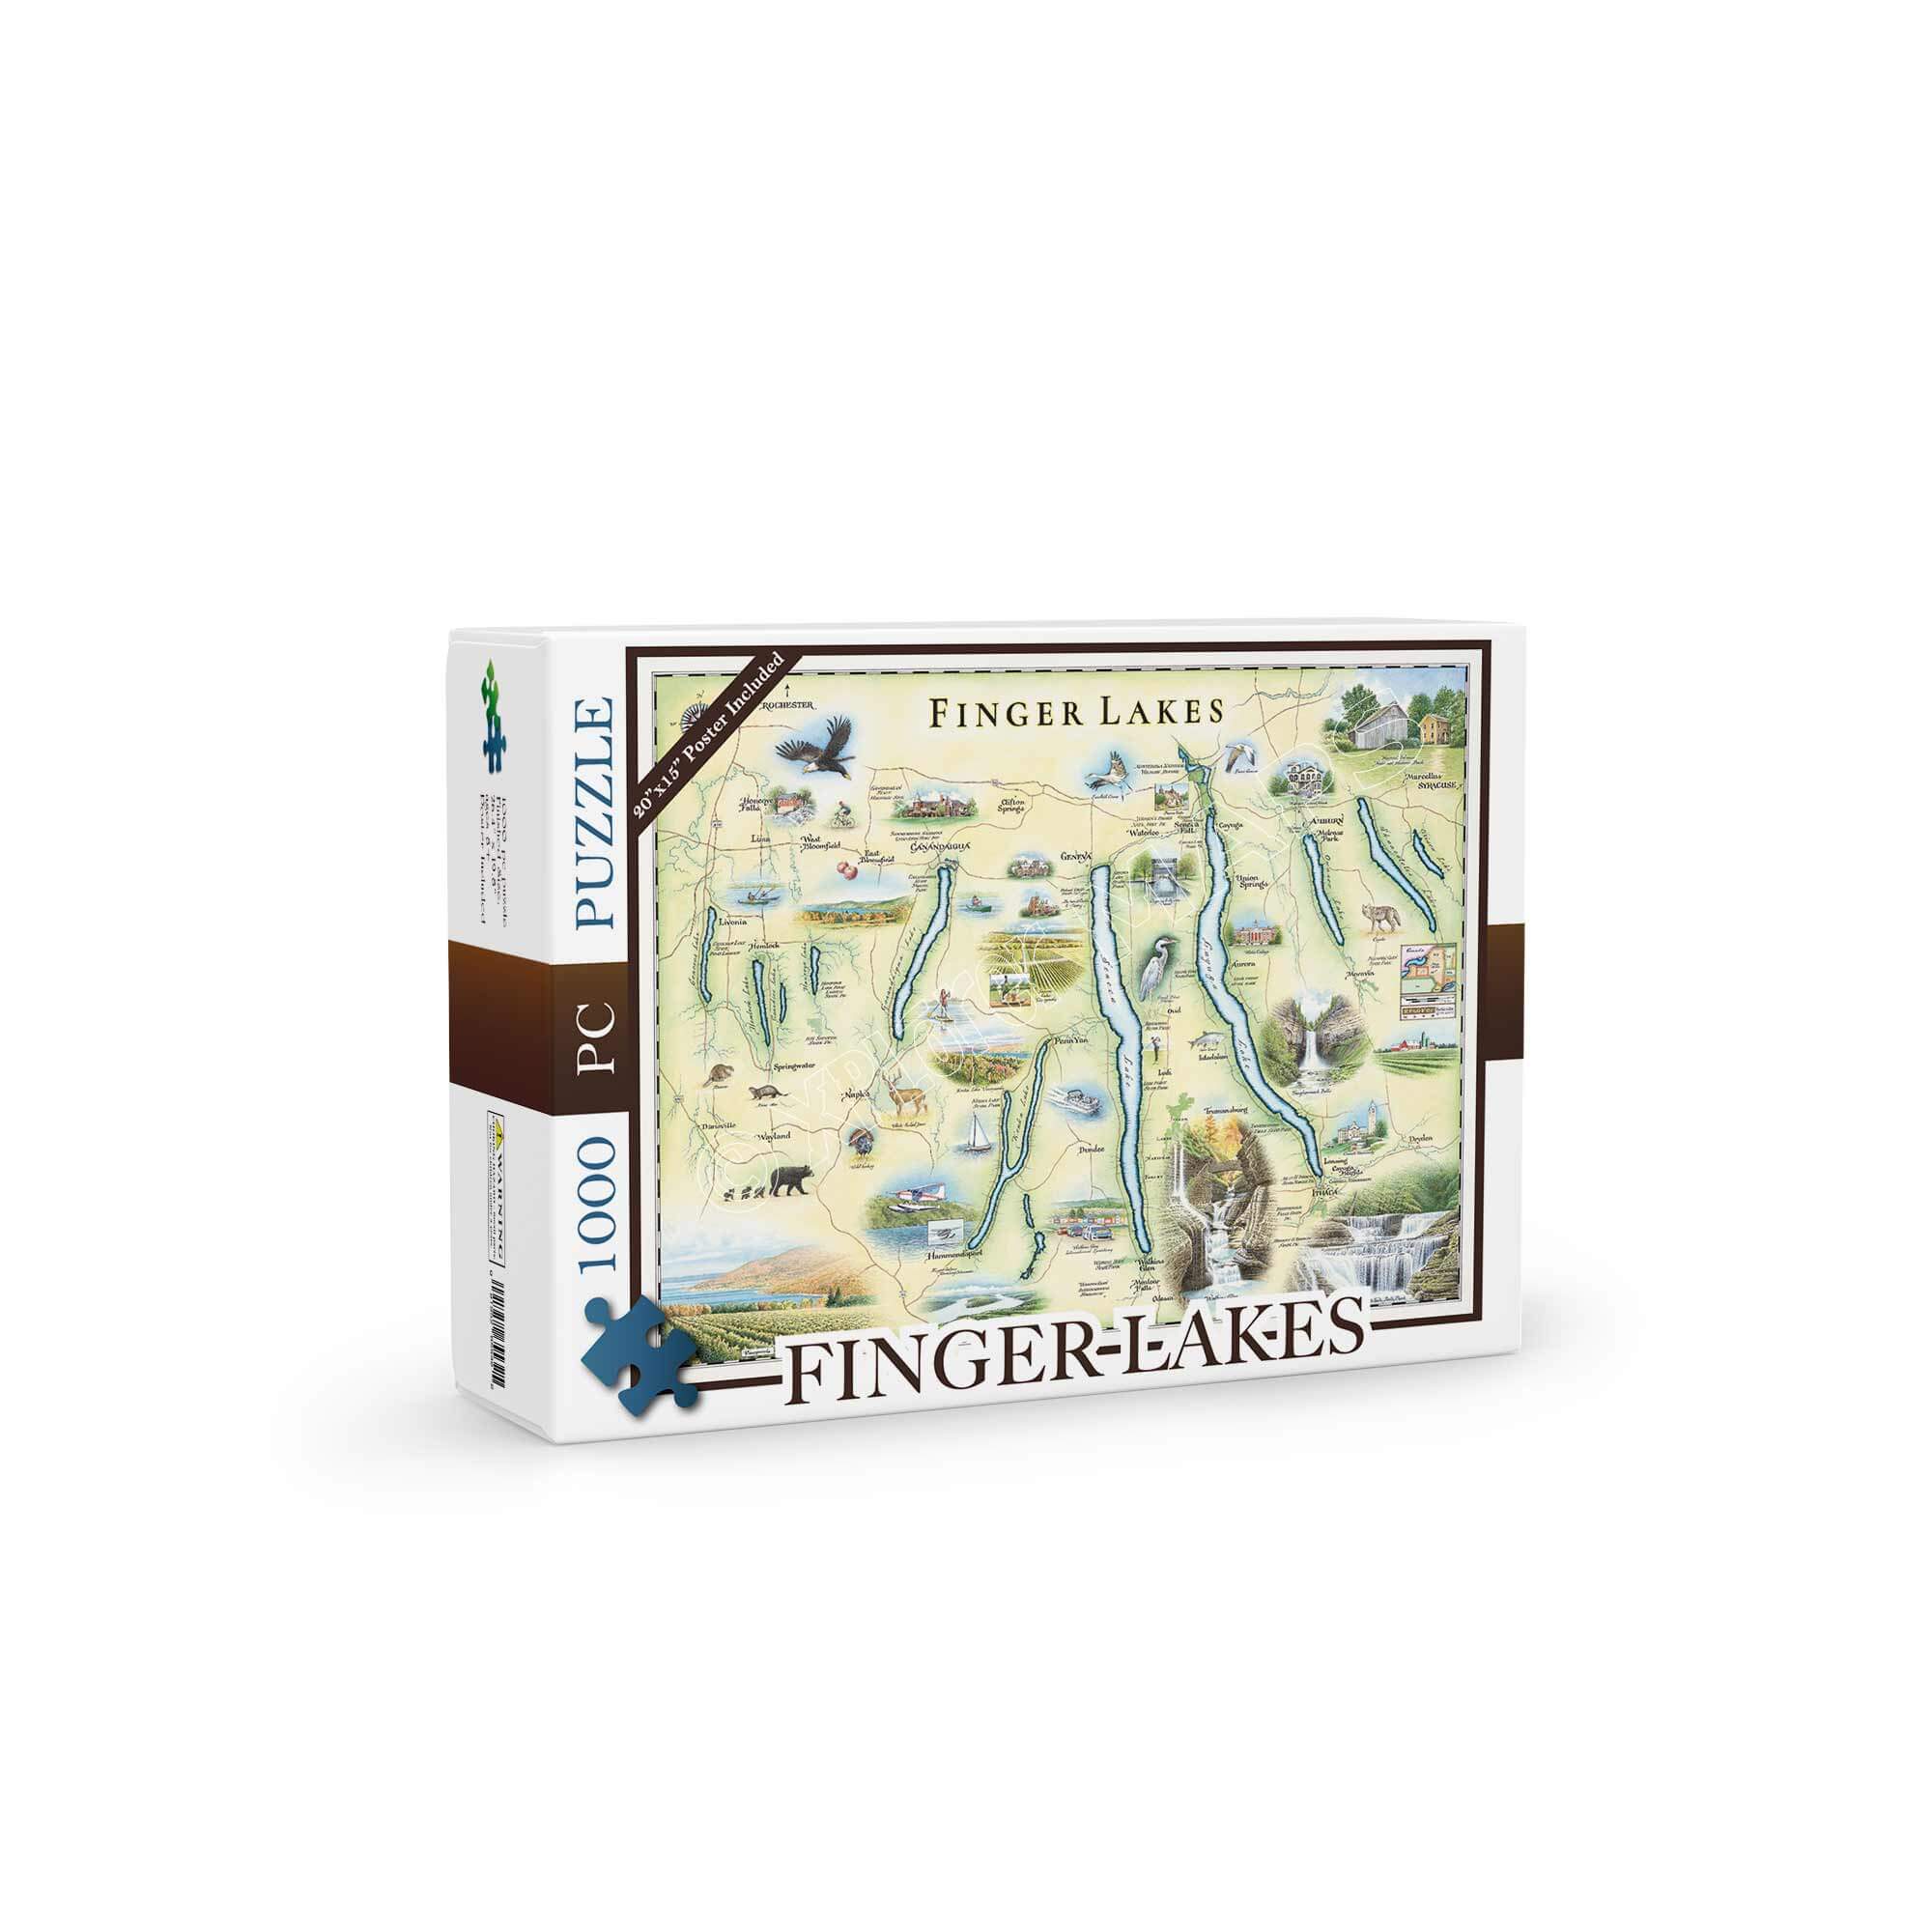 Finger Lakes with this captivating 1000-piece puzzle. Featuring a stunning depiction of the region's scenic landscapes and iconic attractions, it's the perfect way to unwind while enjoying the charm of New York's lakeside adventures and vineyards.